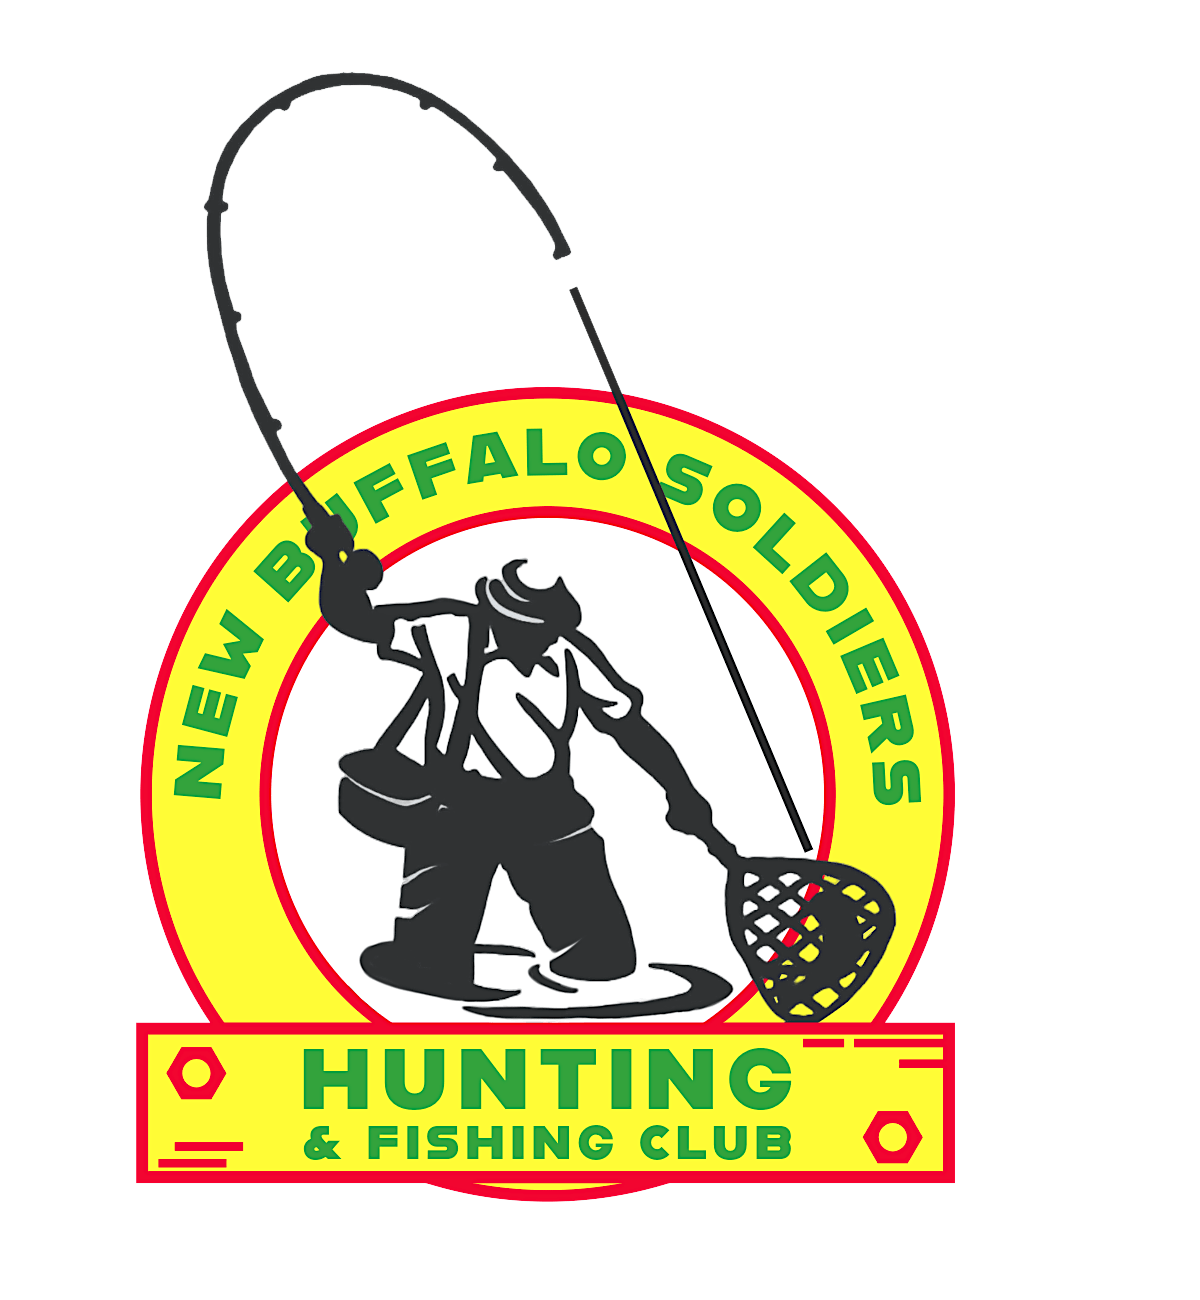 New Buffalo Soldiers Hunting & Fishing Club Relaunch Party